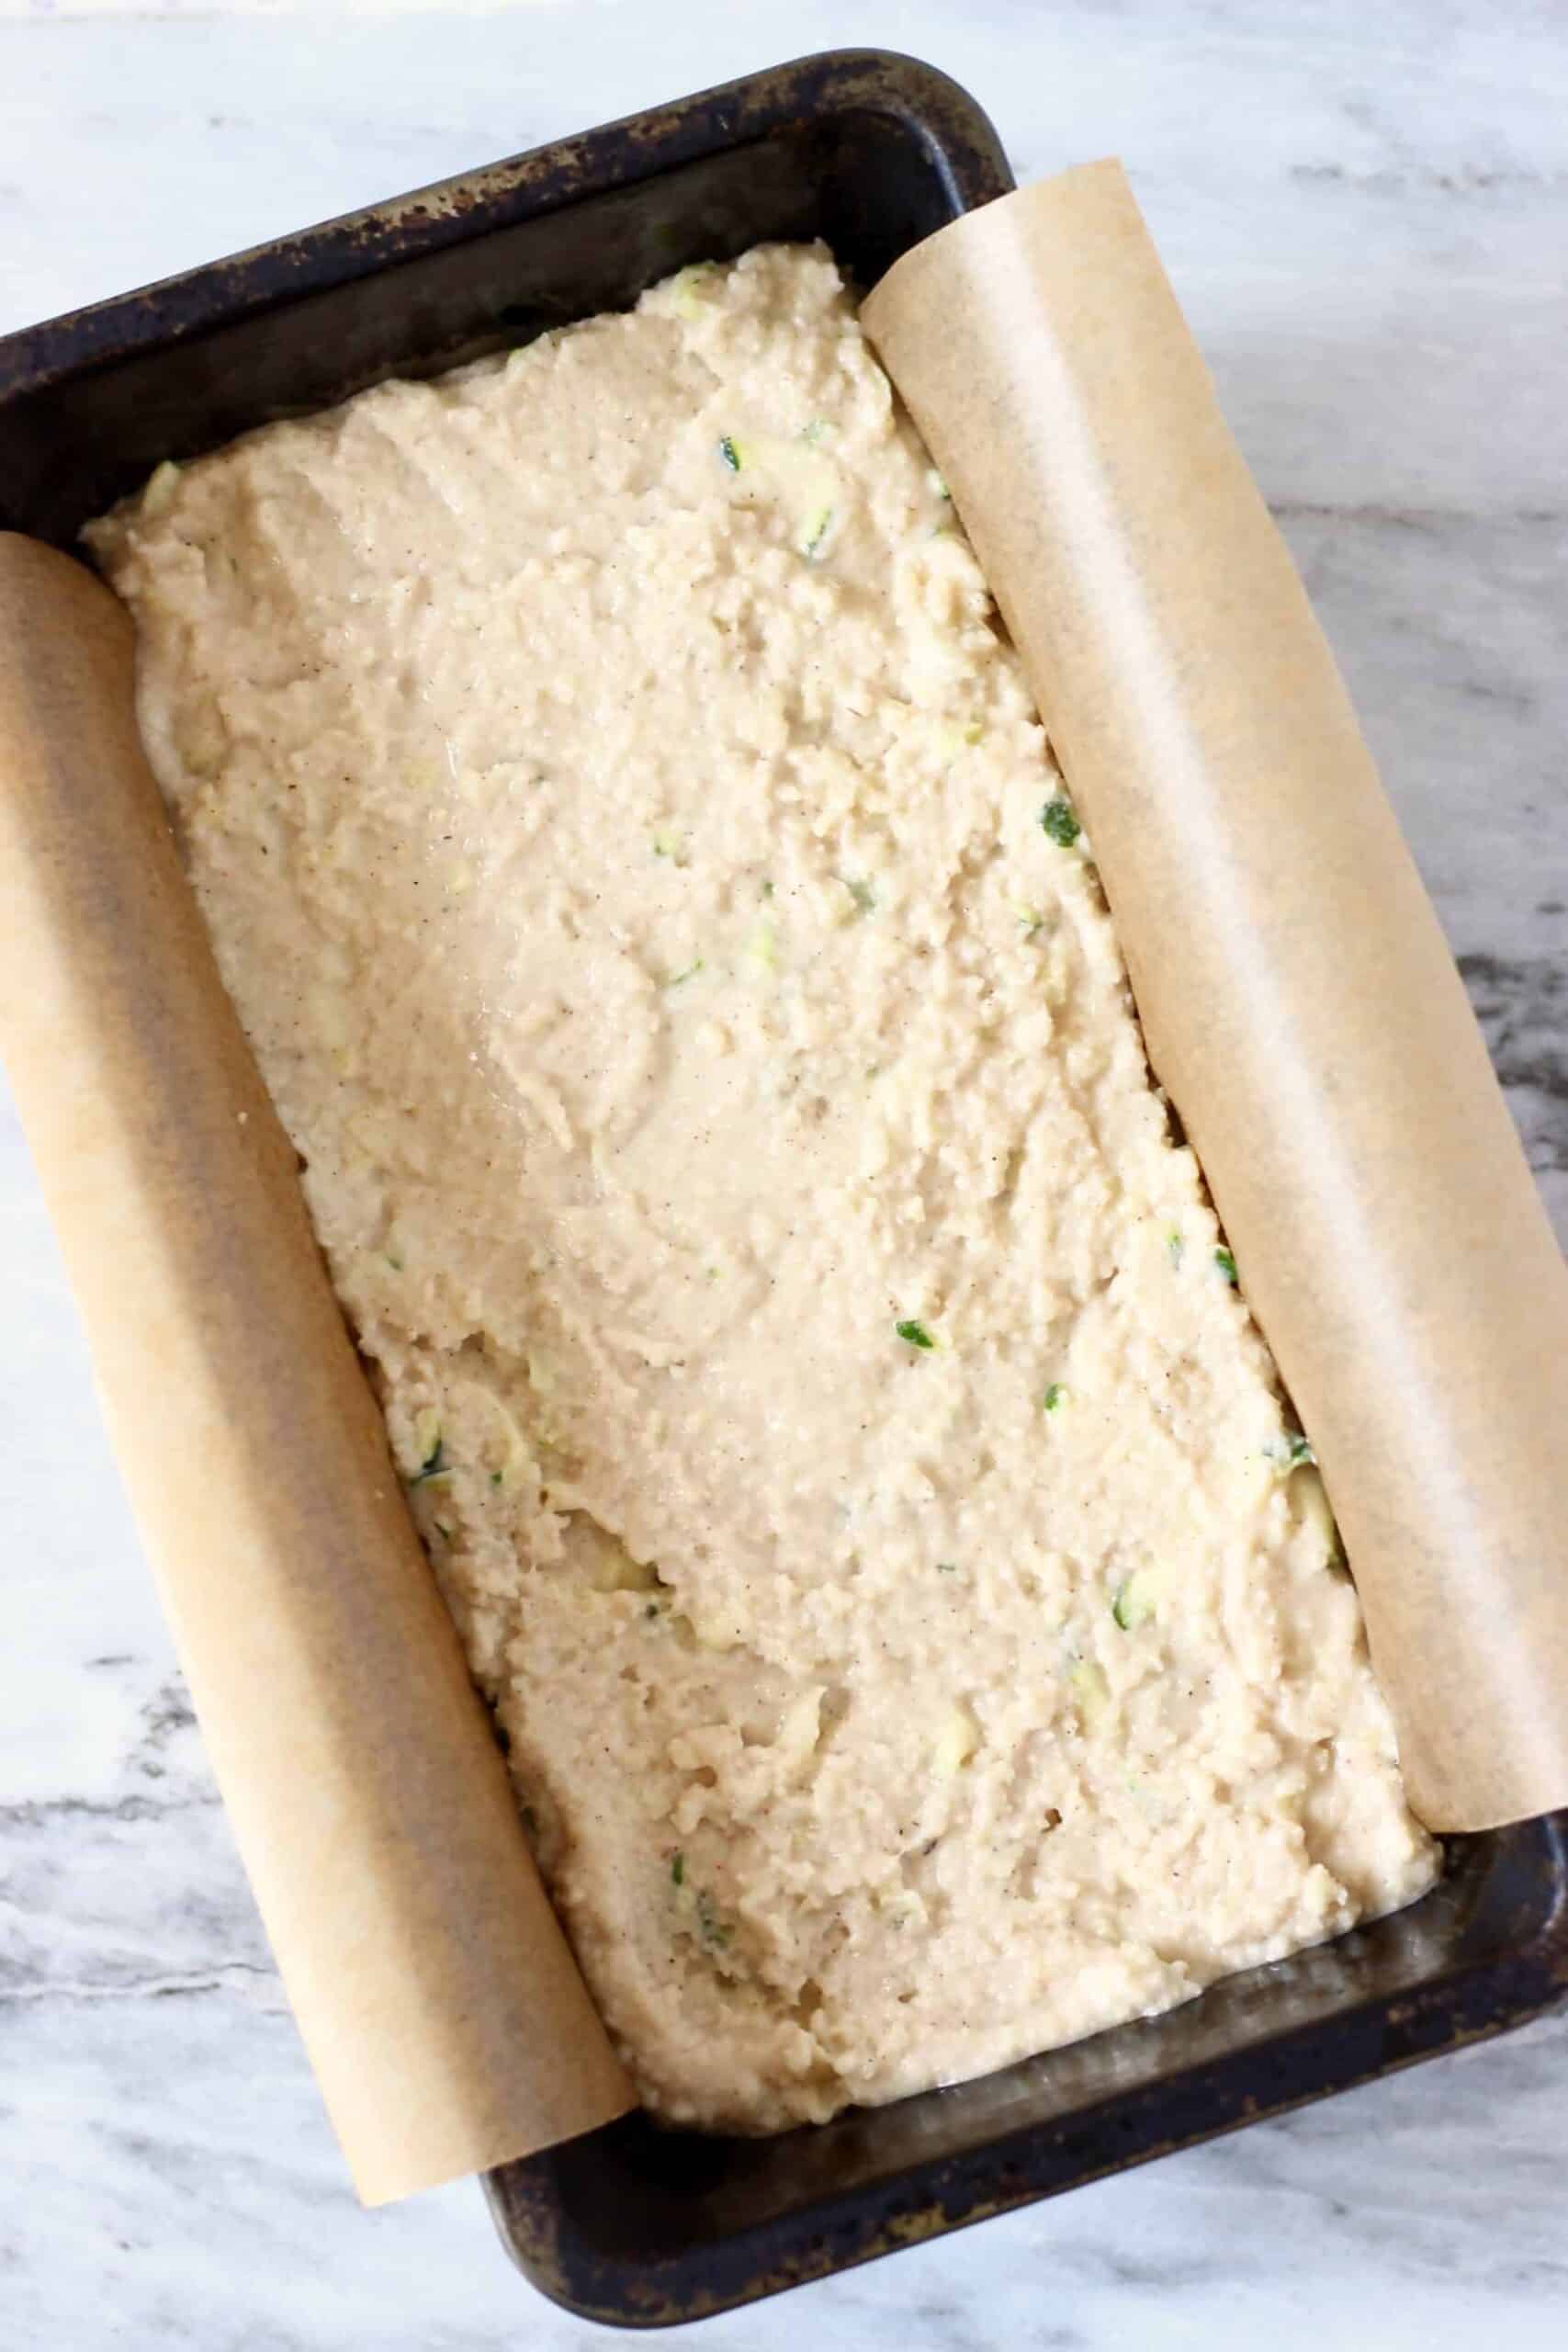 Raw gluten-free vegan zucchini bread batter in a loaf tin lined with baking paper